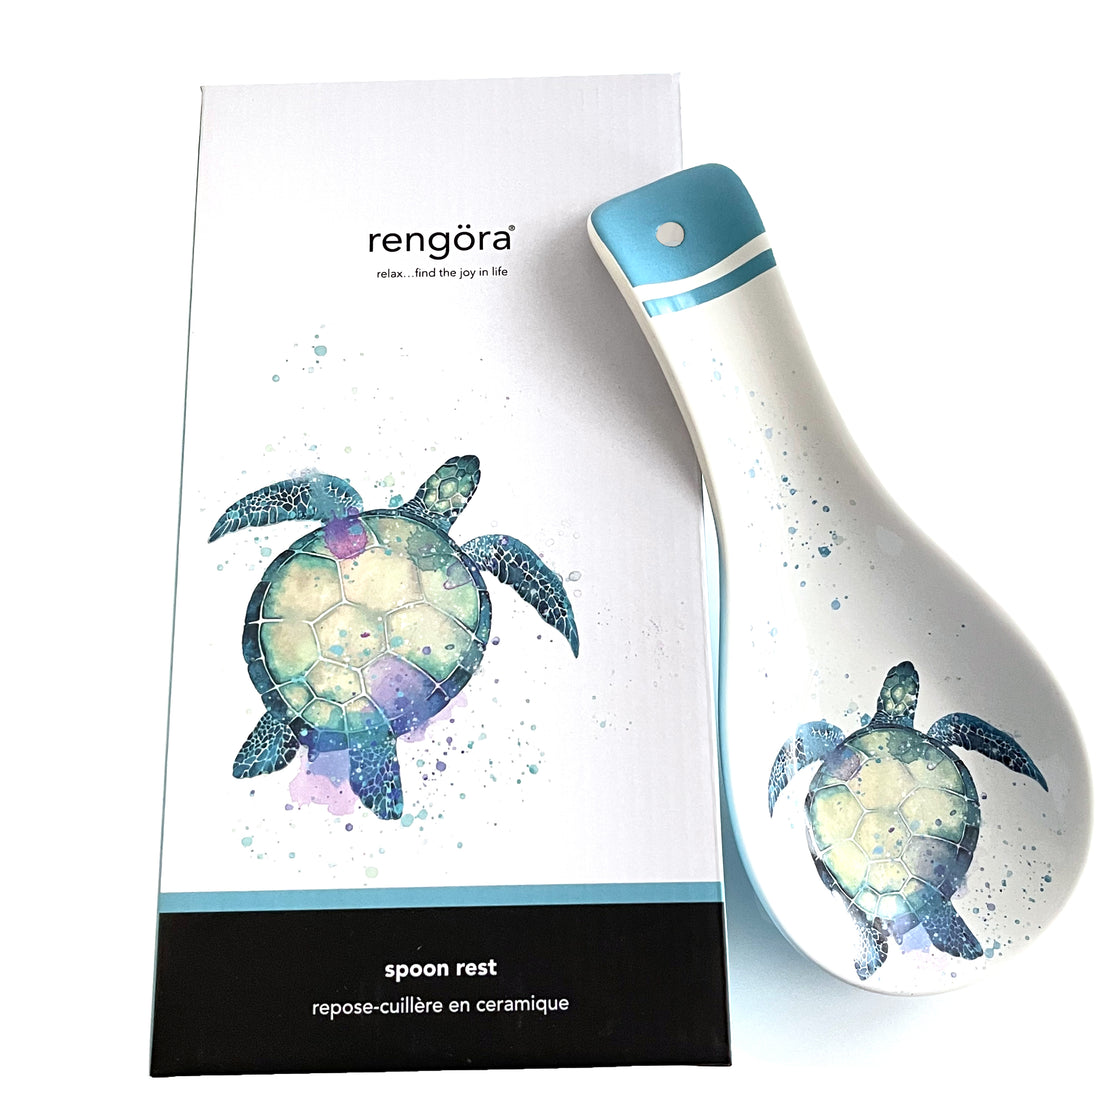 sea turtle spoon rest ceramic teal with white and blue and green shown with beautiful gift box packaging it comes in